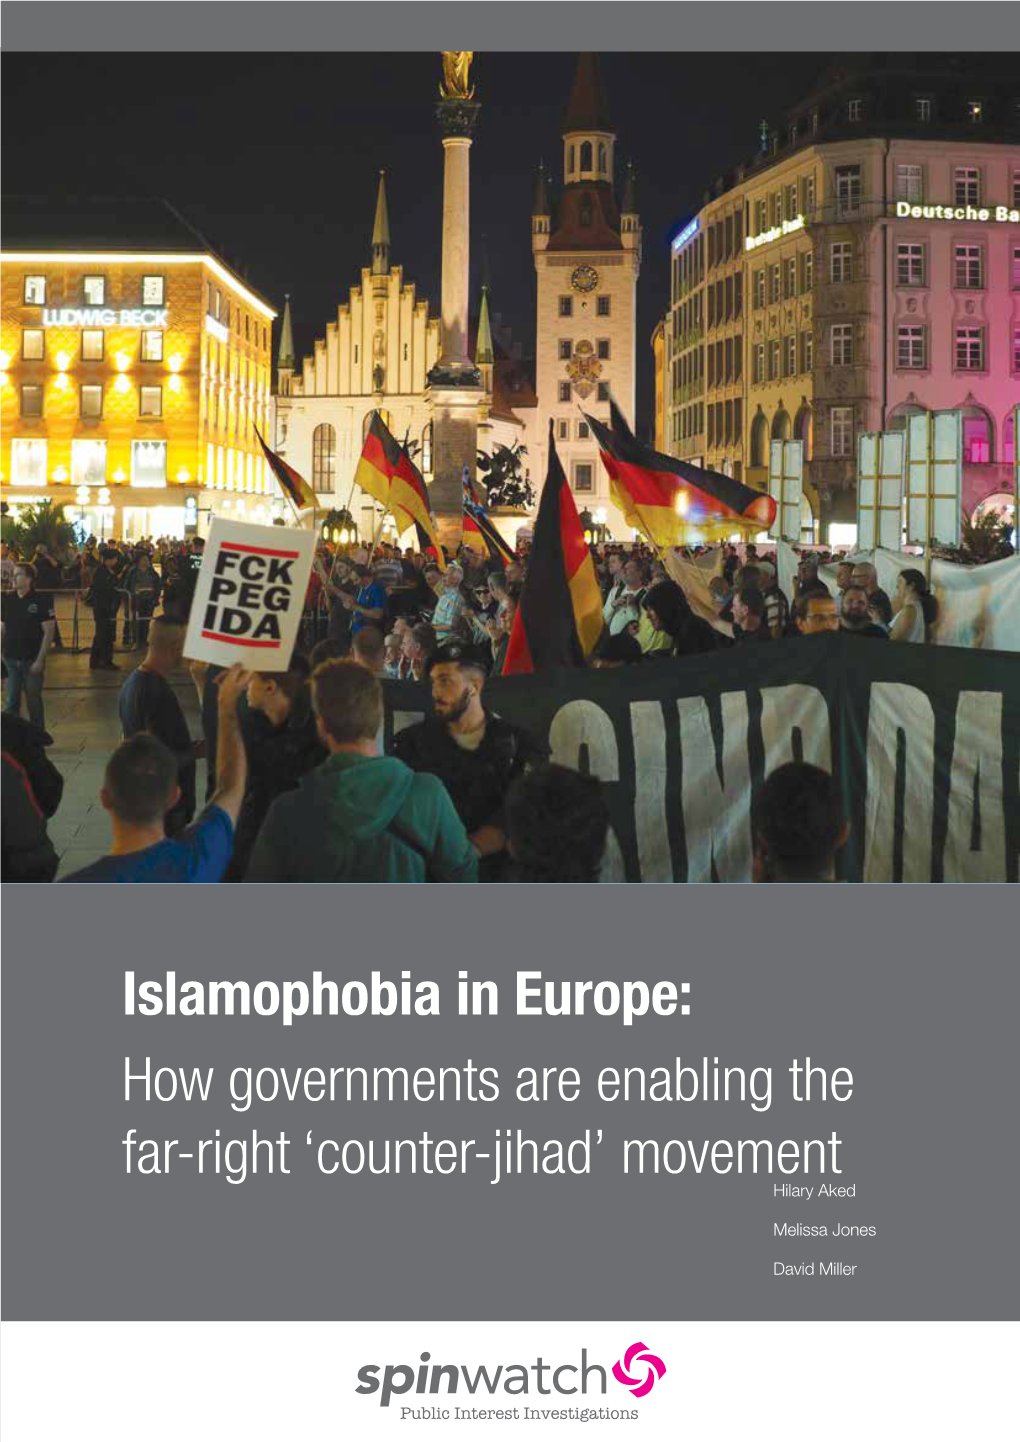 Islamophobia in Europe: How Governments Are Enabling the Far-Right ‘Counter-Jihad’ Movement Hilary Aked